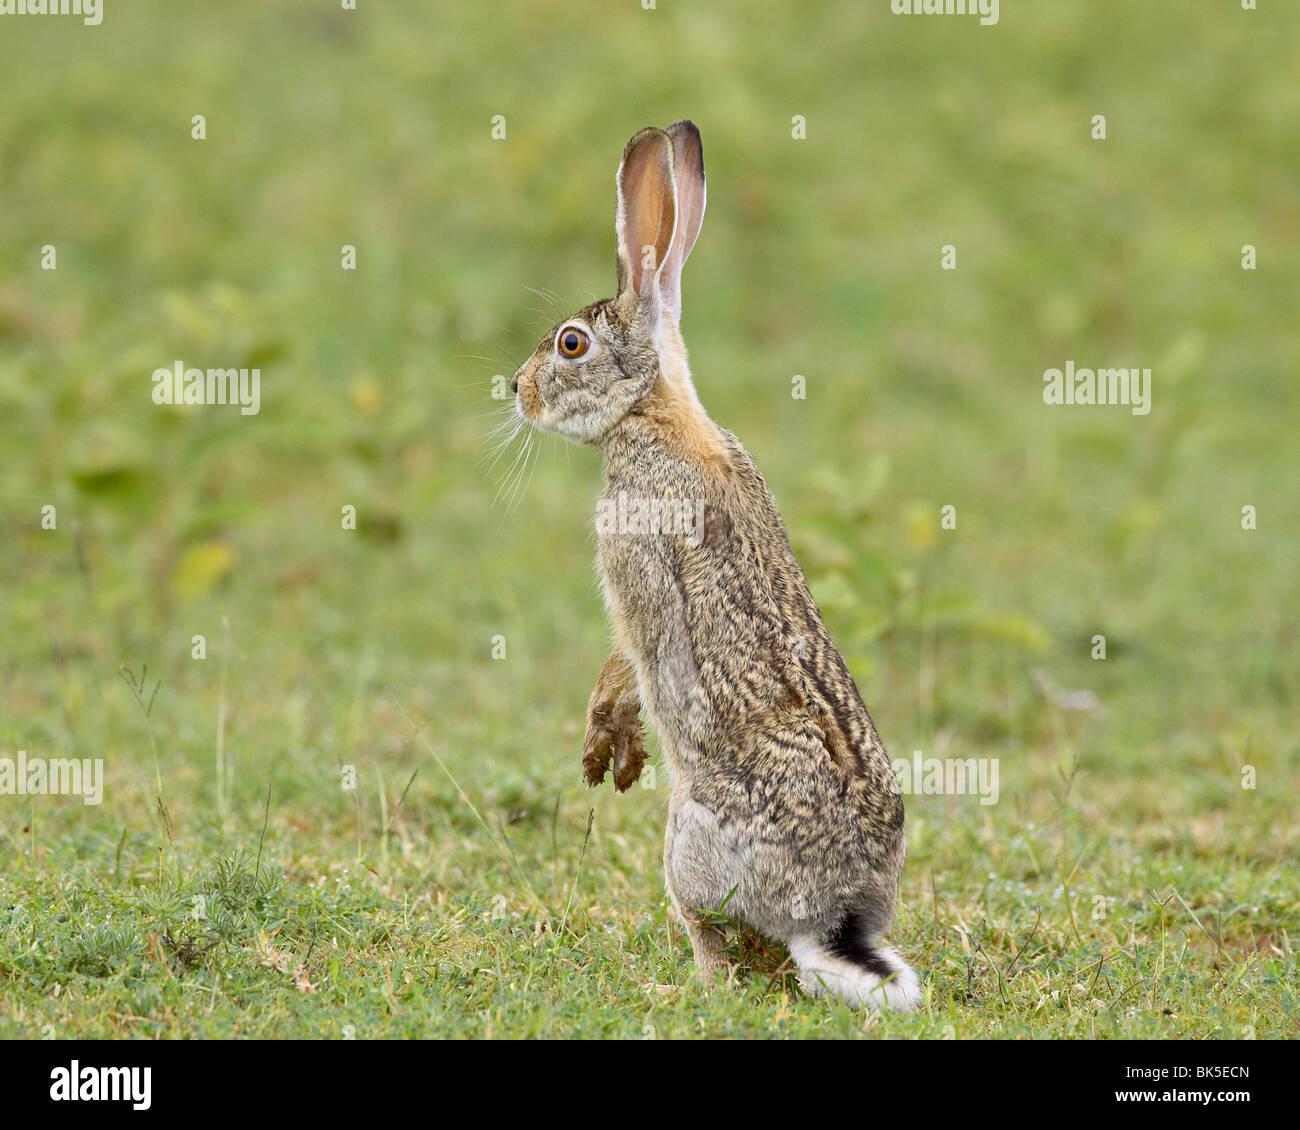 African hare (Cape hare) (brown hare) (Lepus capensis), Serengeti National Park, Tanzania, East Africa, Africa Stock Photo